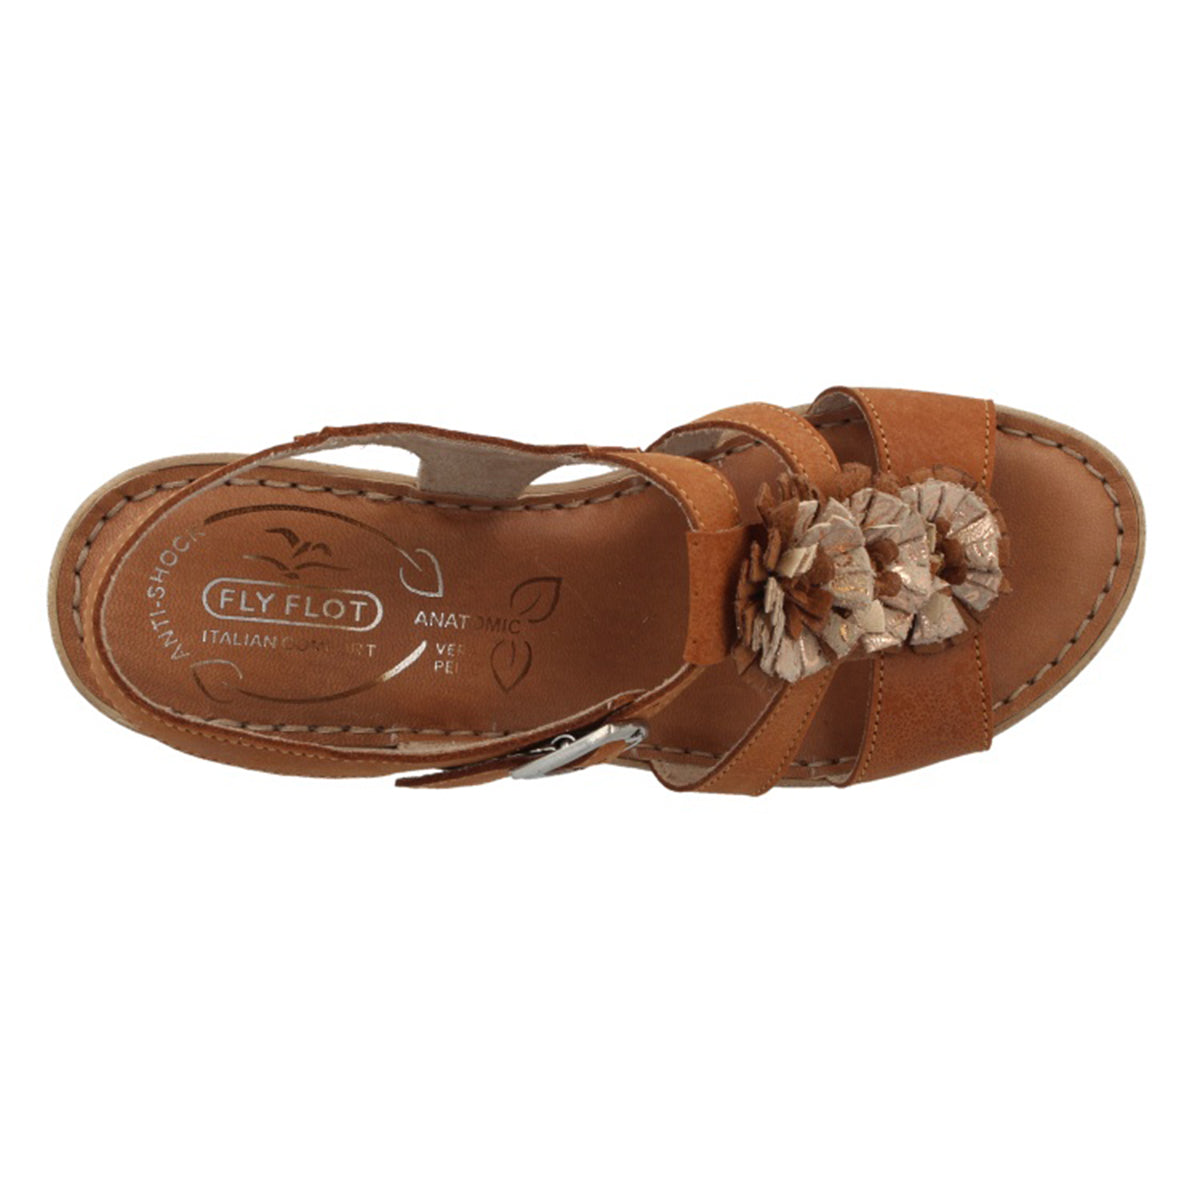 See the Tan Leather Flower Wedge Back Strap Women Sandals in the colour TAN, available in various sizes